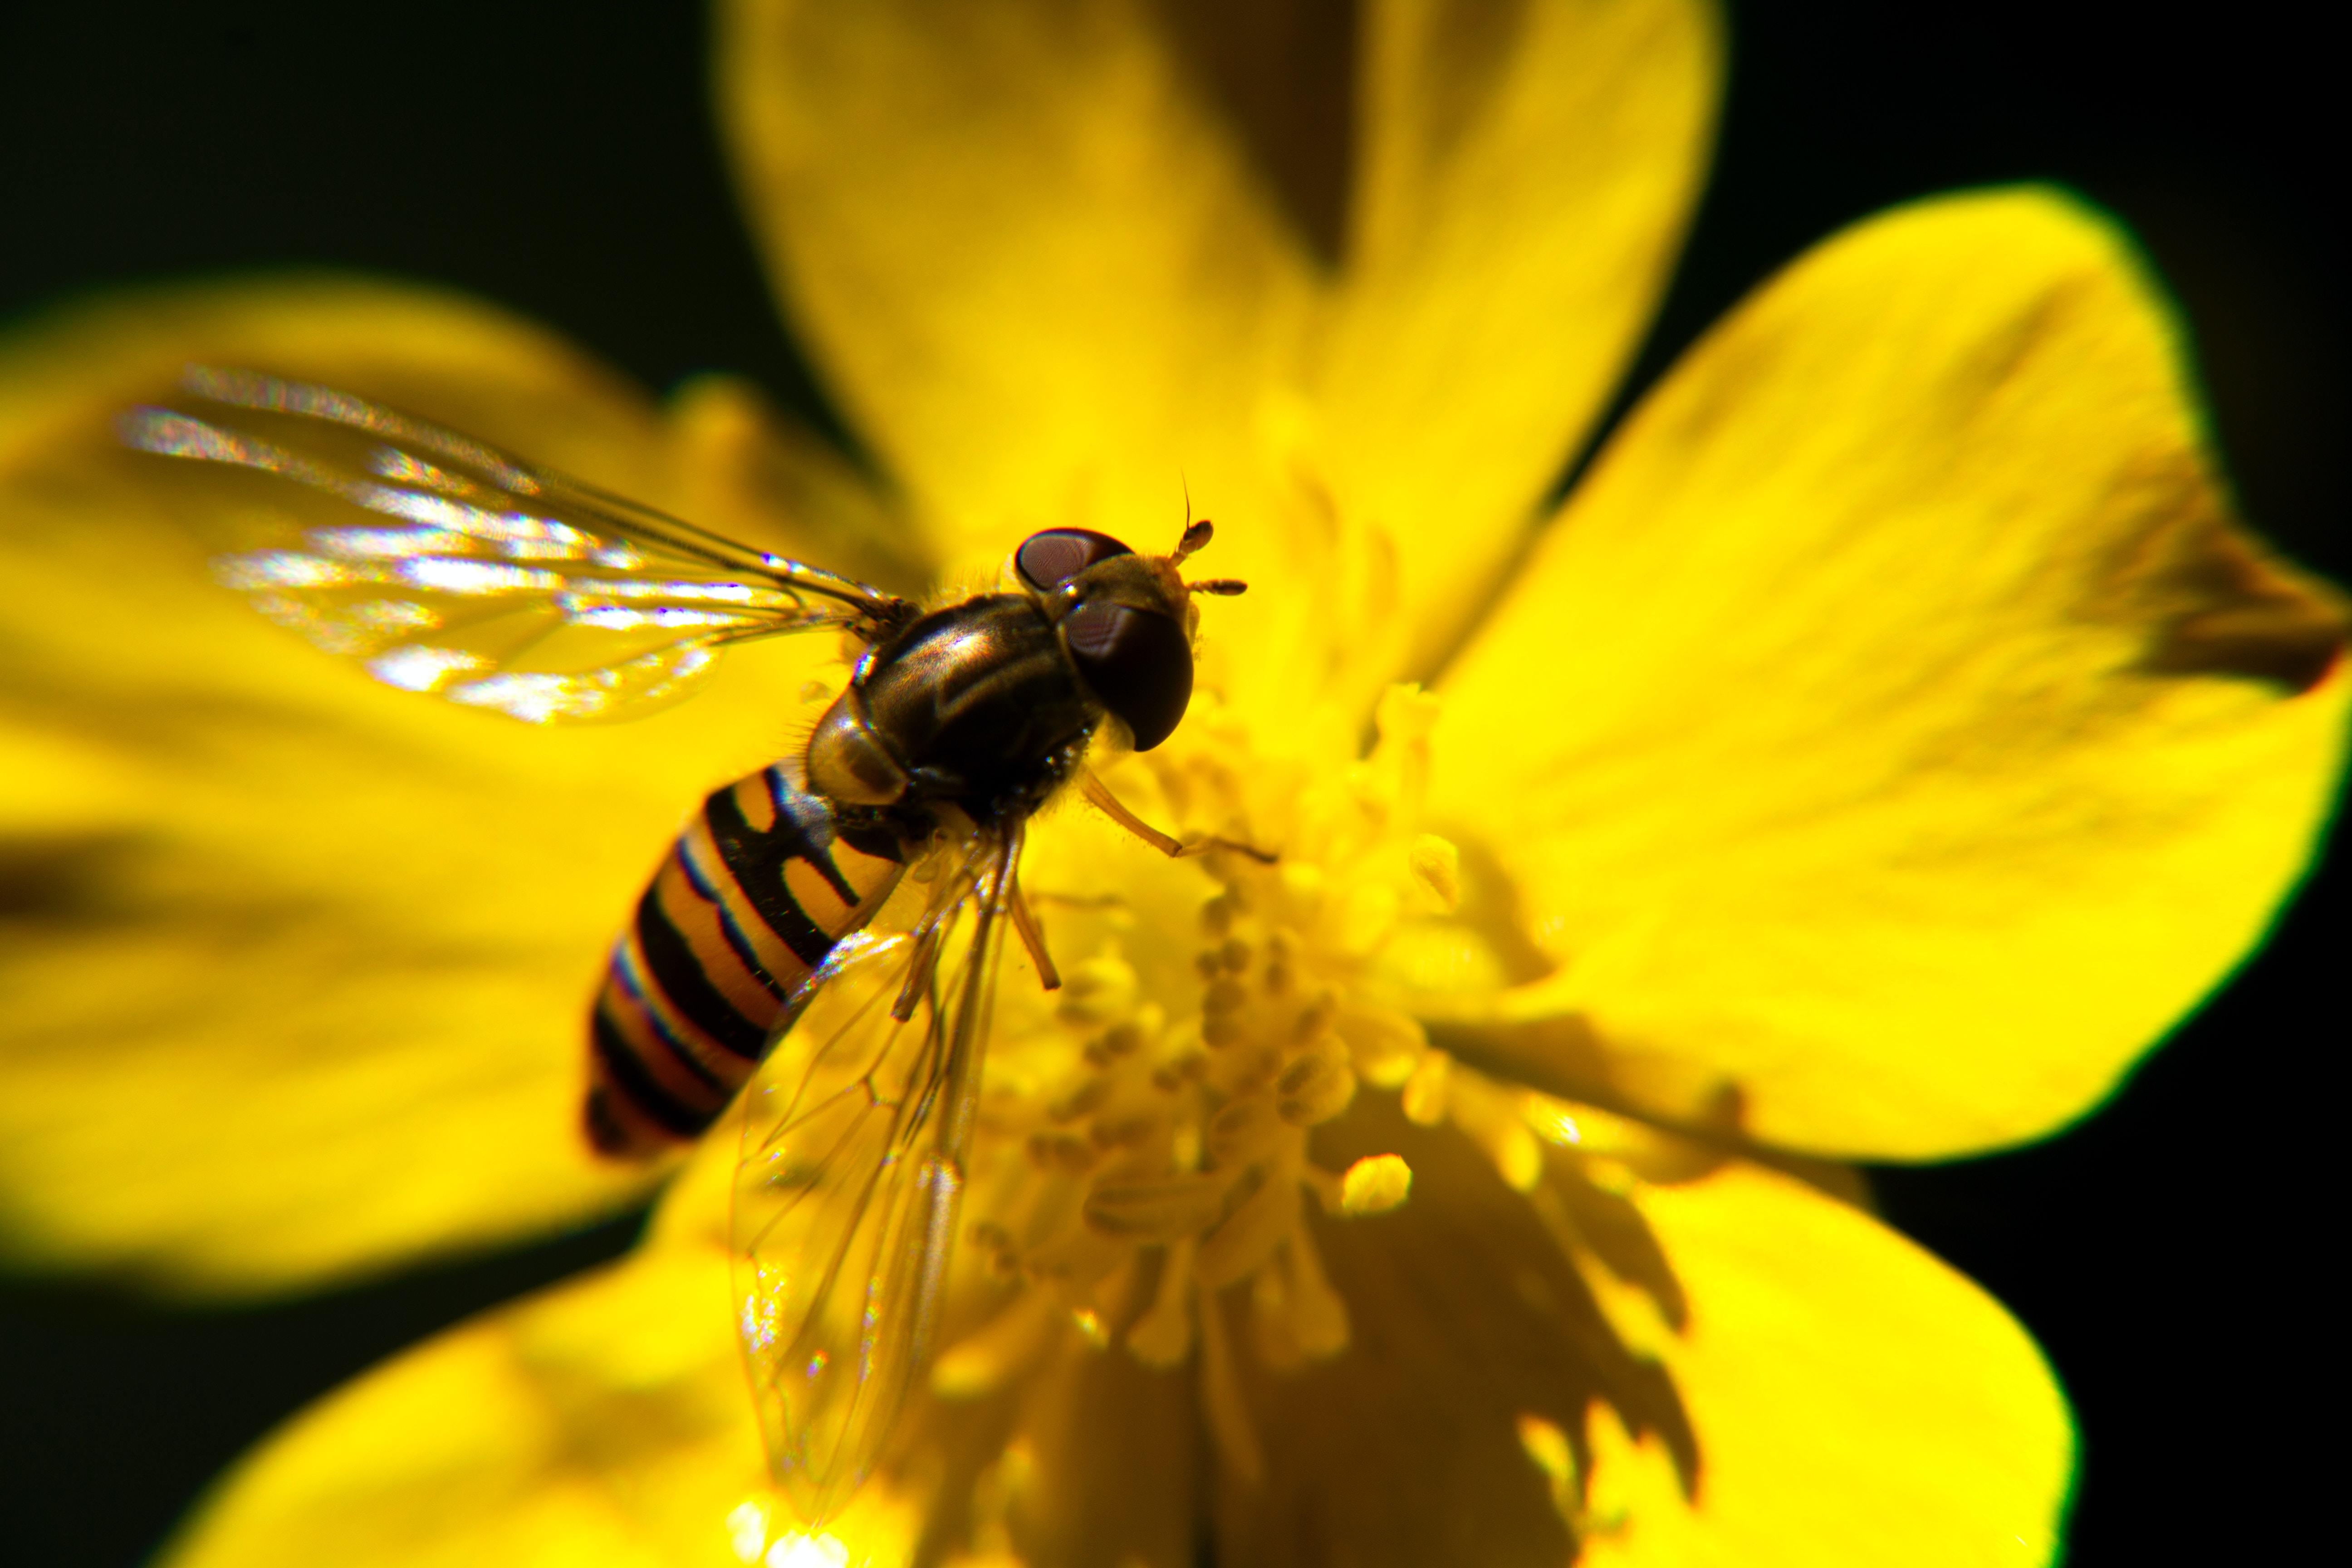 A bee on a yellow flower.